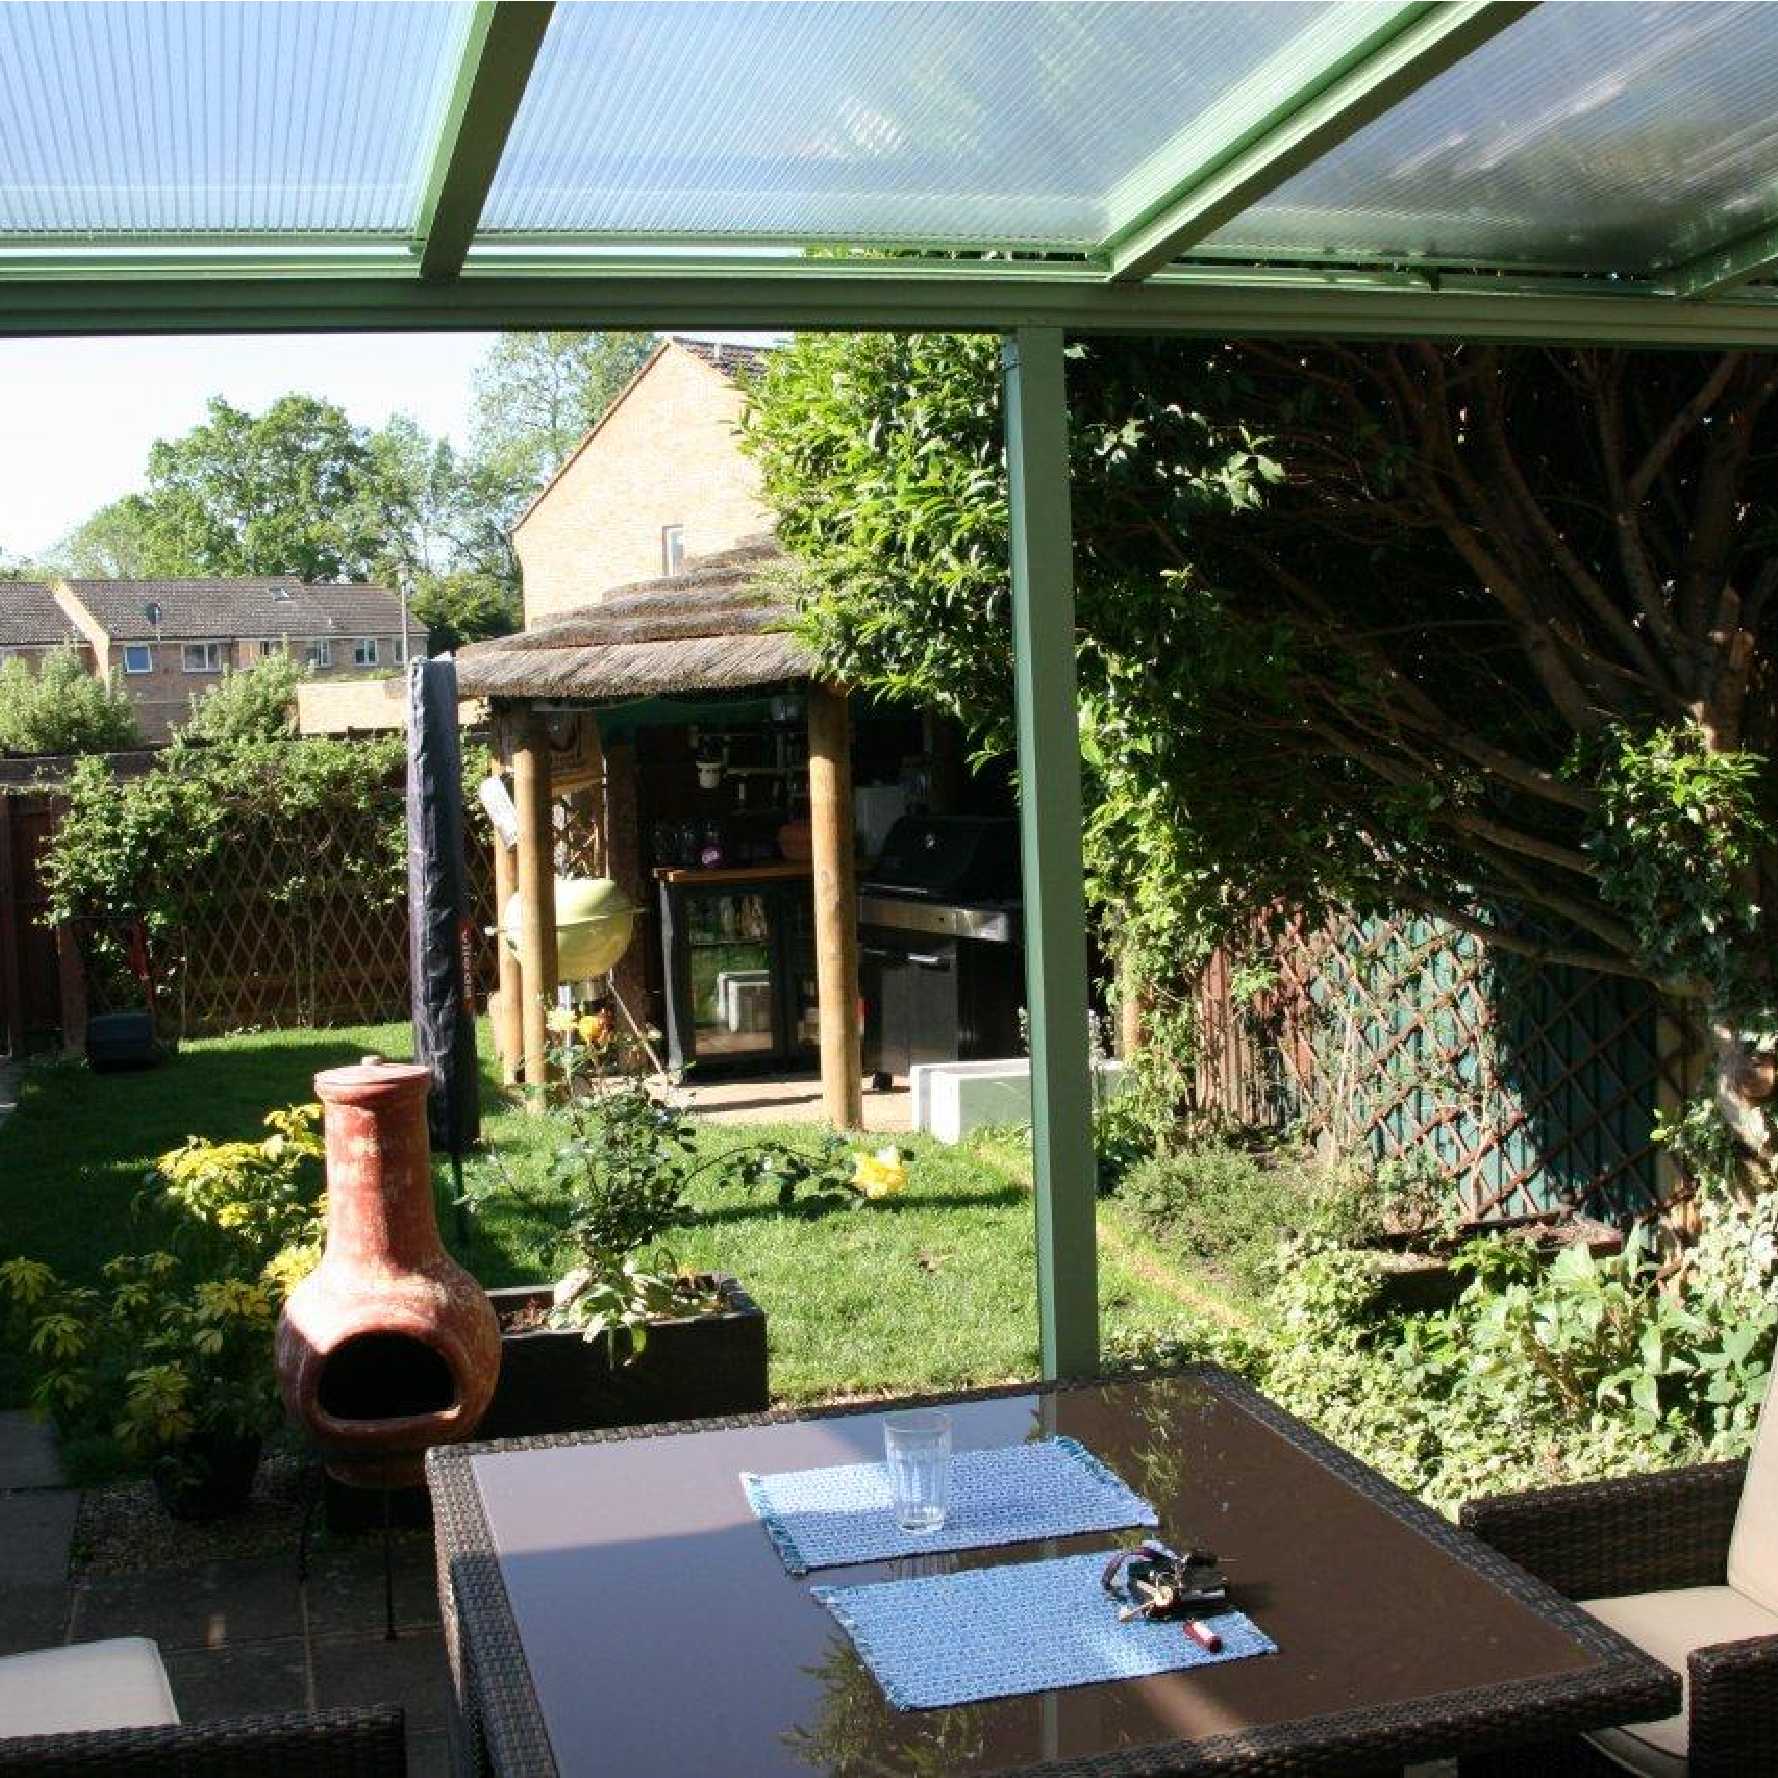 Affordable Omega Smart Lean-To Canopy, White with 16mm Polycarbonate Glazing - 5.6m (W) x 3.5m (P), (3) Supporting Posts